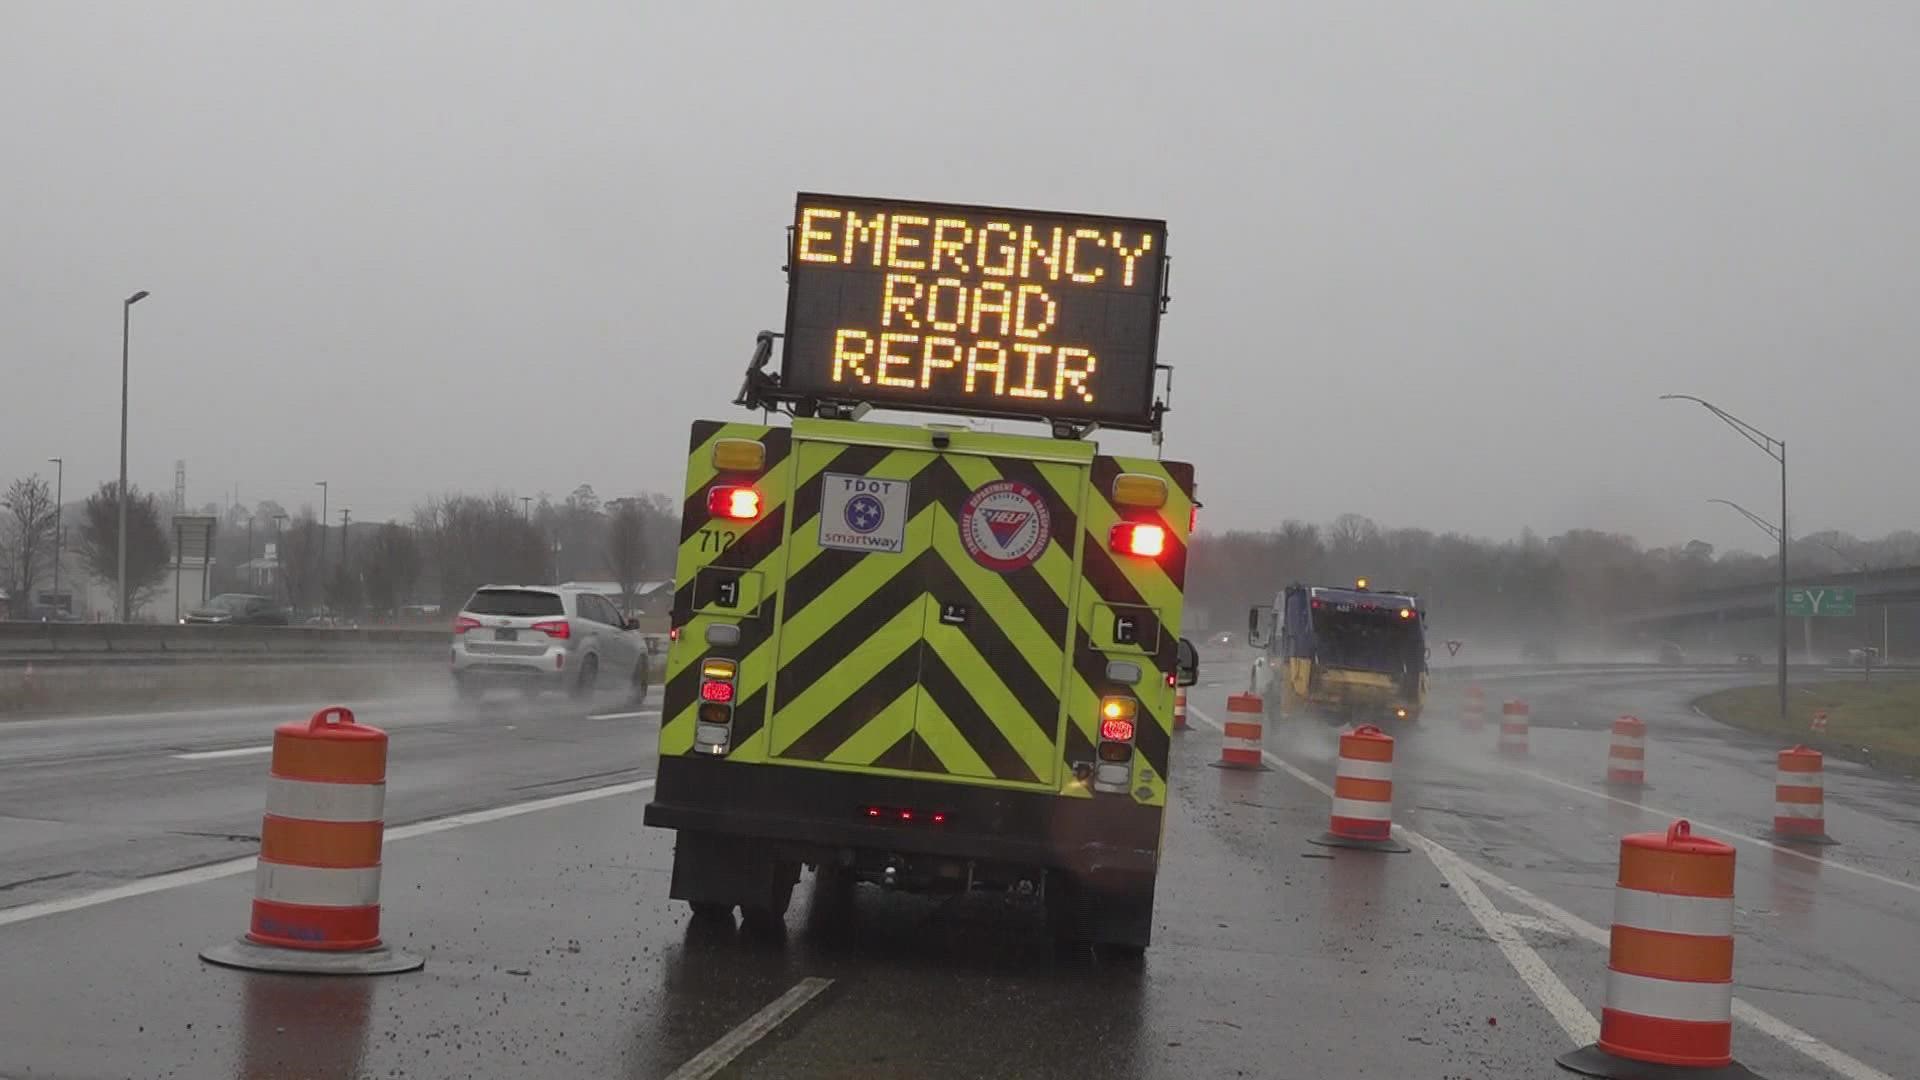 The past few days of rain have brought problems to the roads. We look into how crews from the Tennessee Department of Transportation are making the streets safer.